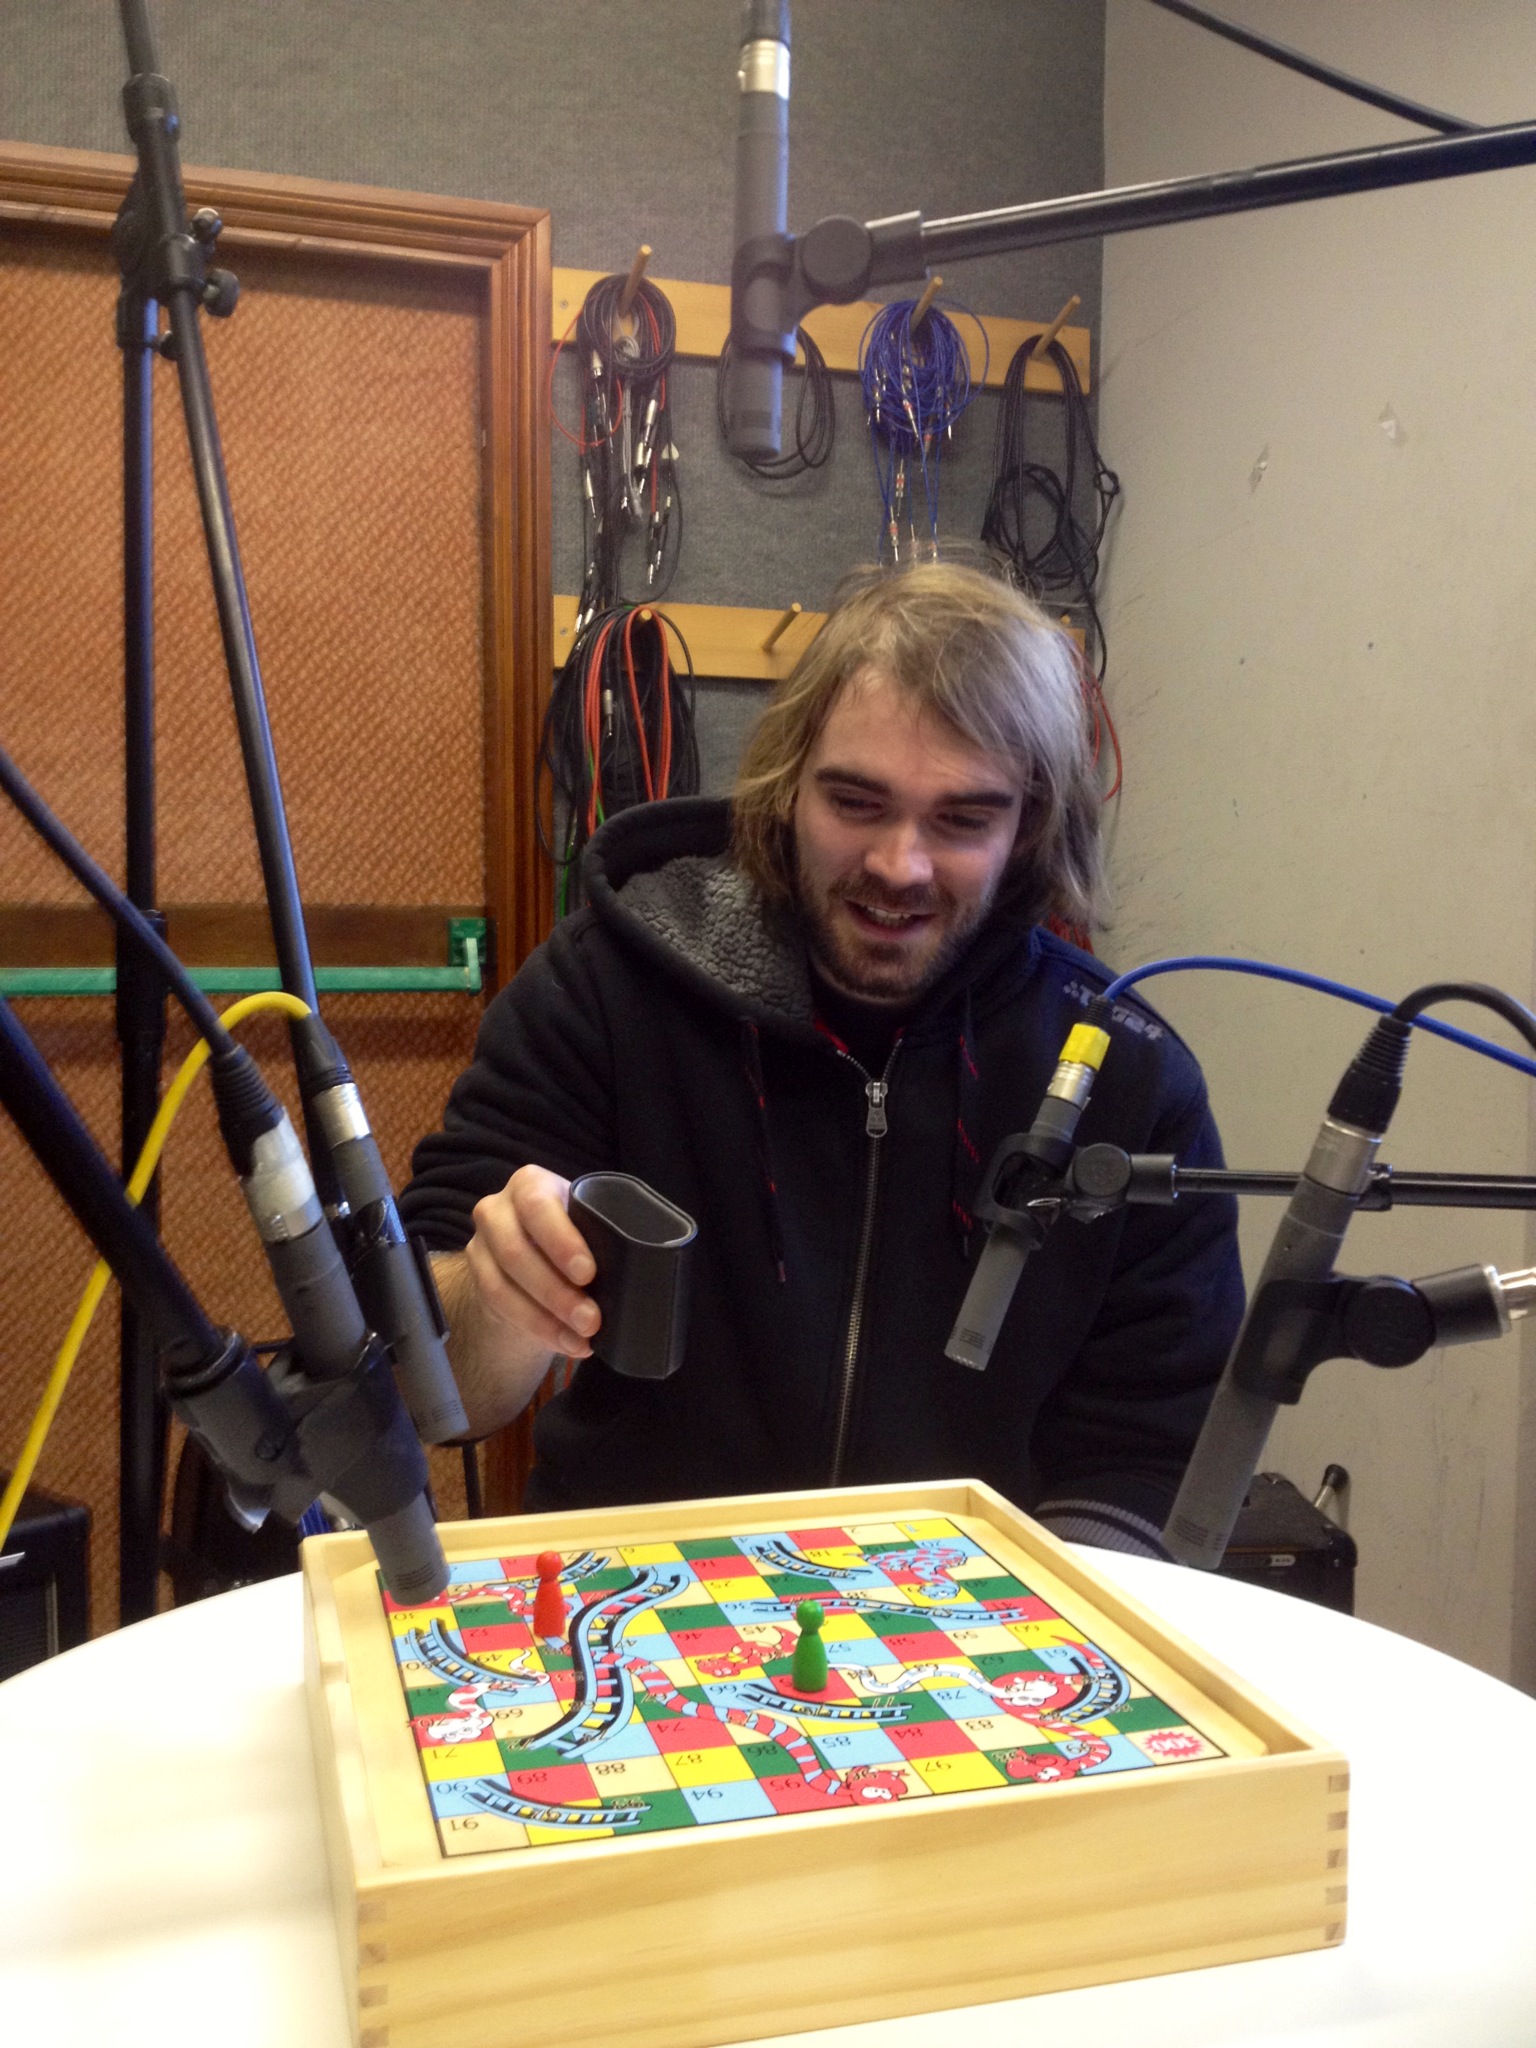 Snakes and ladders sound recording